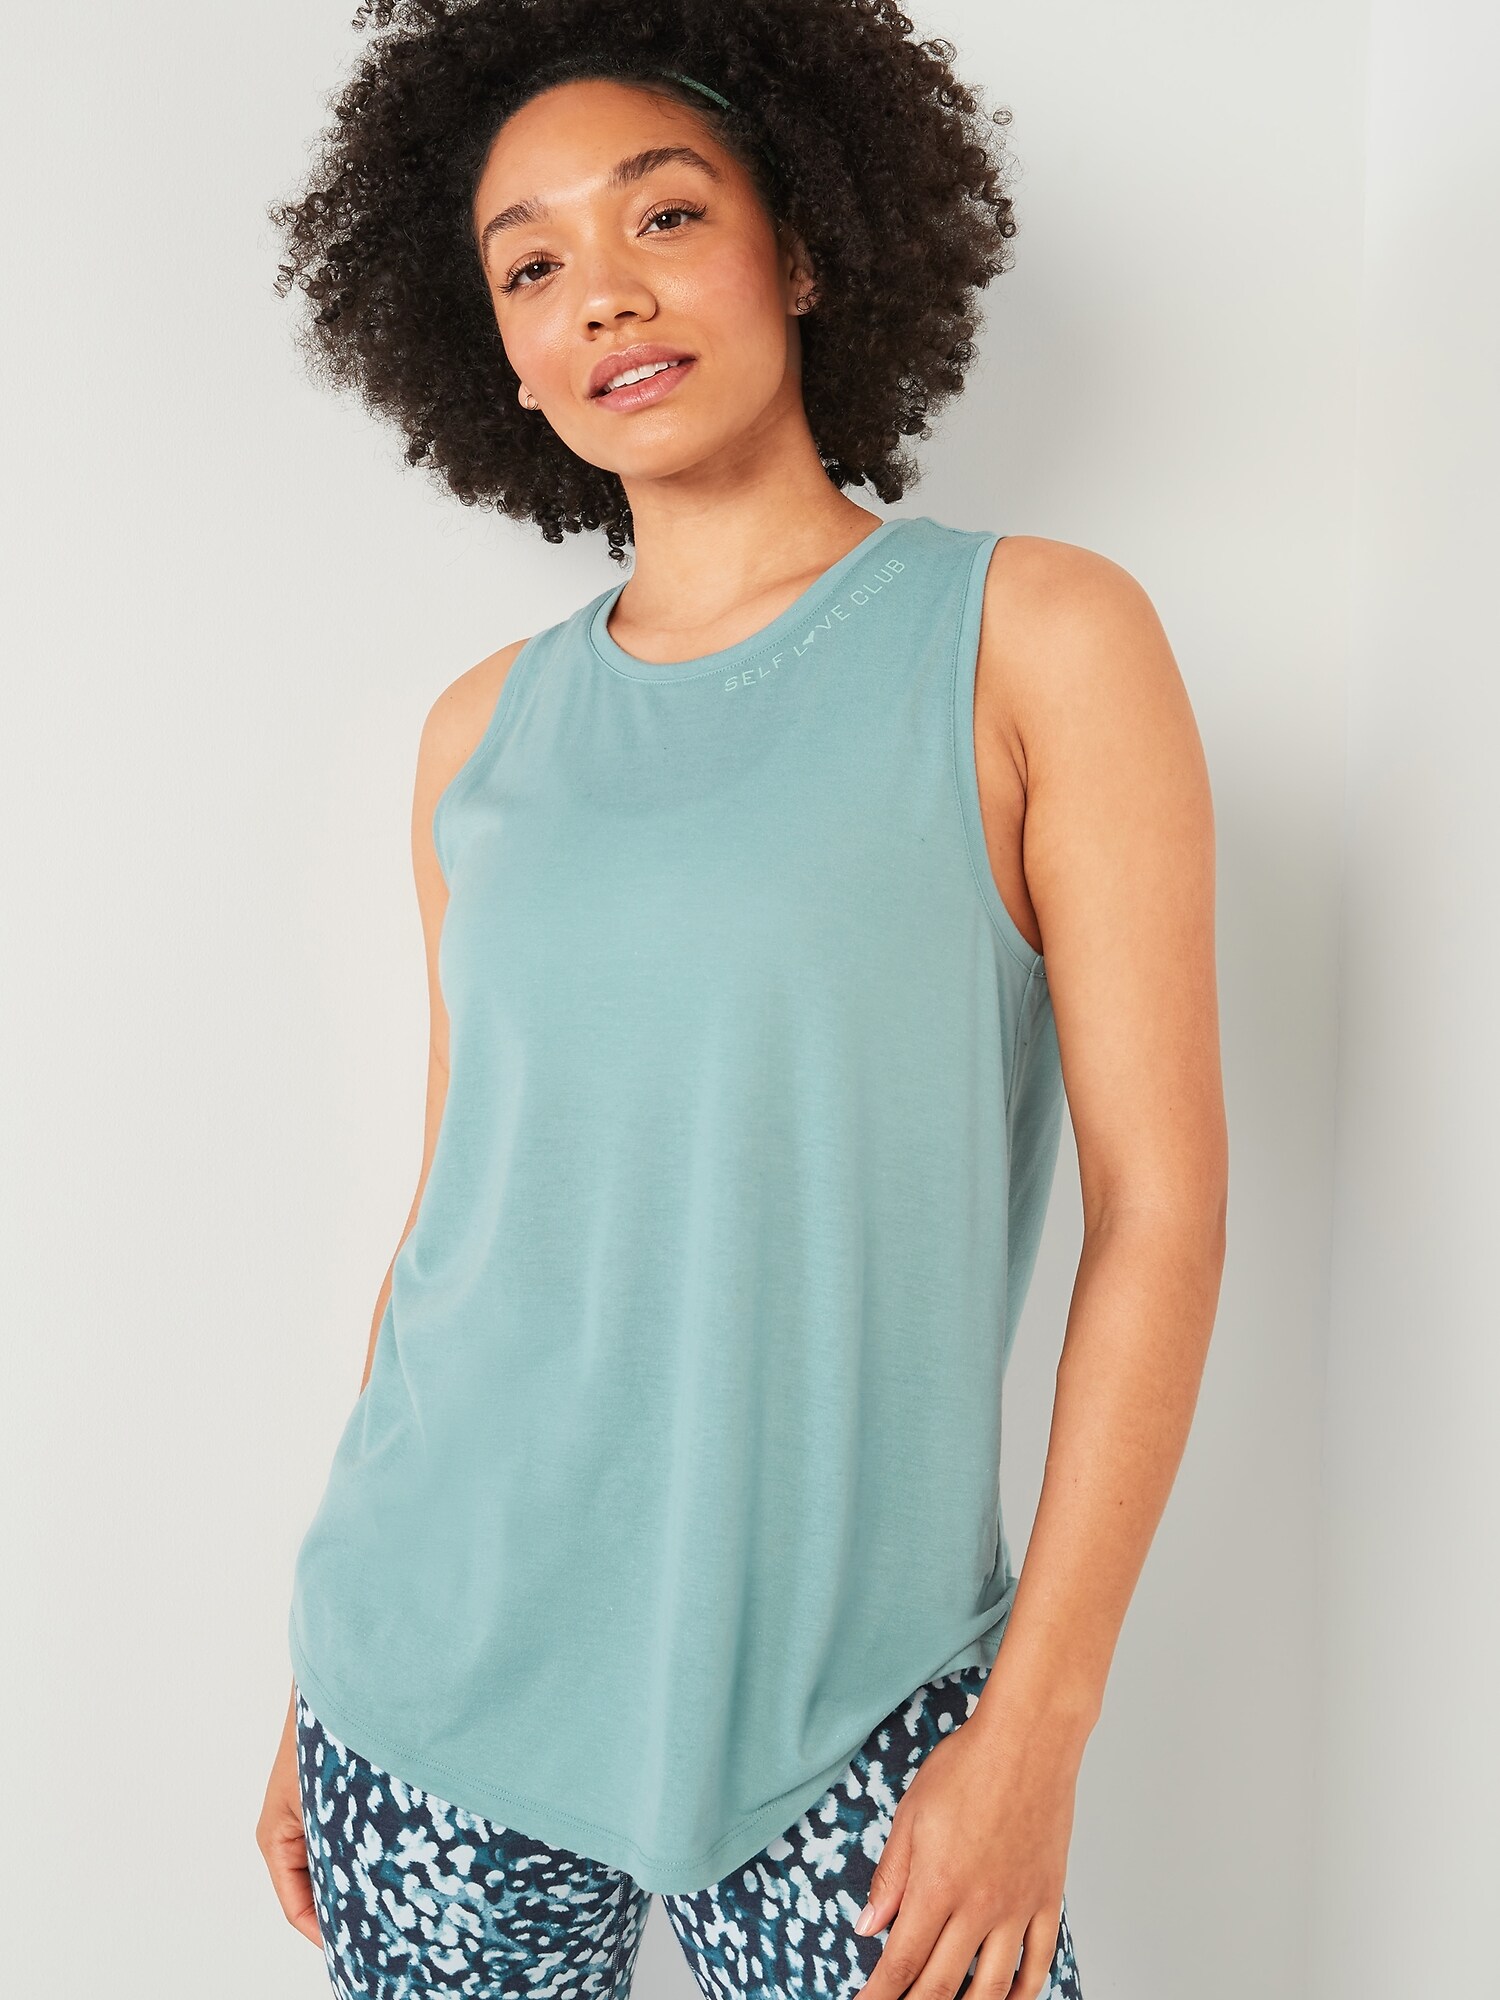 Graphic Muscle Tank Top for Women | Old Navy